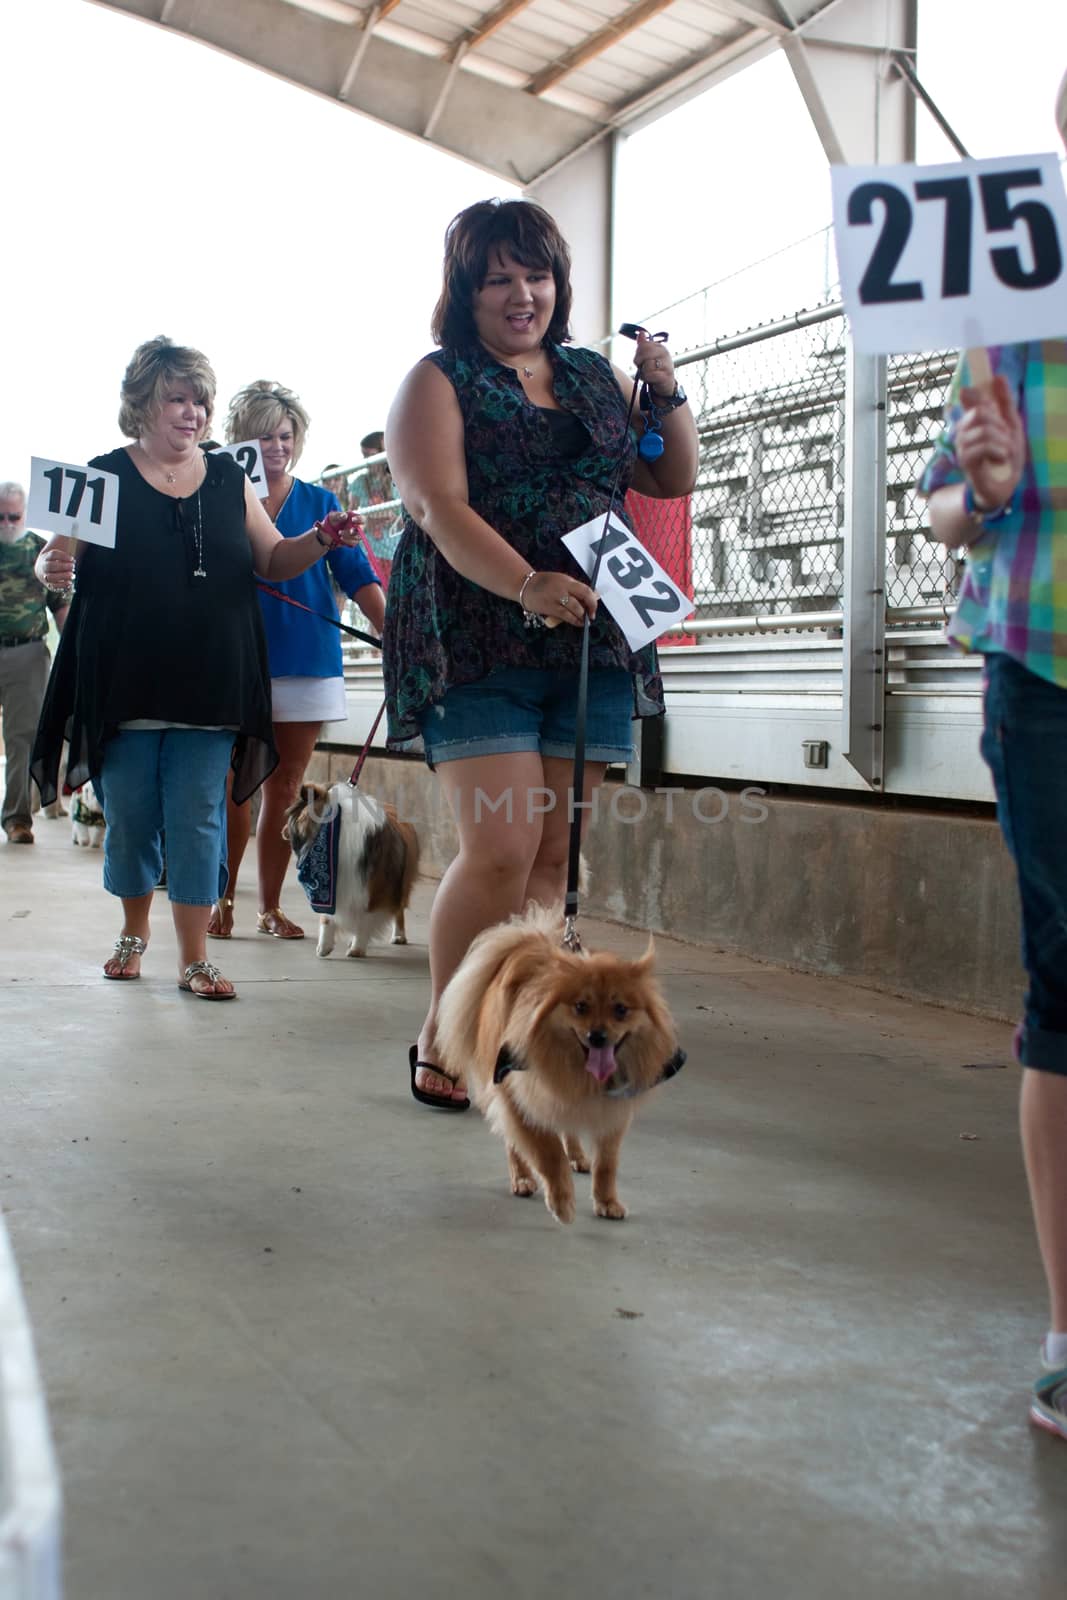 Contestants Parade Their Dogs For Judging At Dog Festival by BluIz60